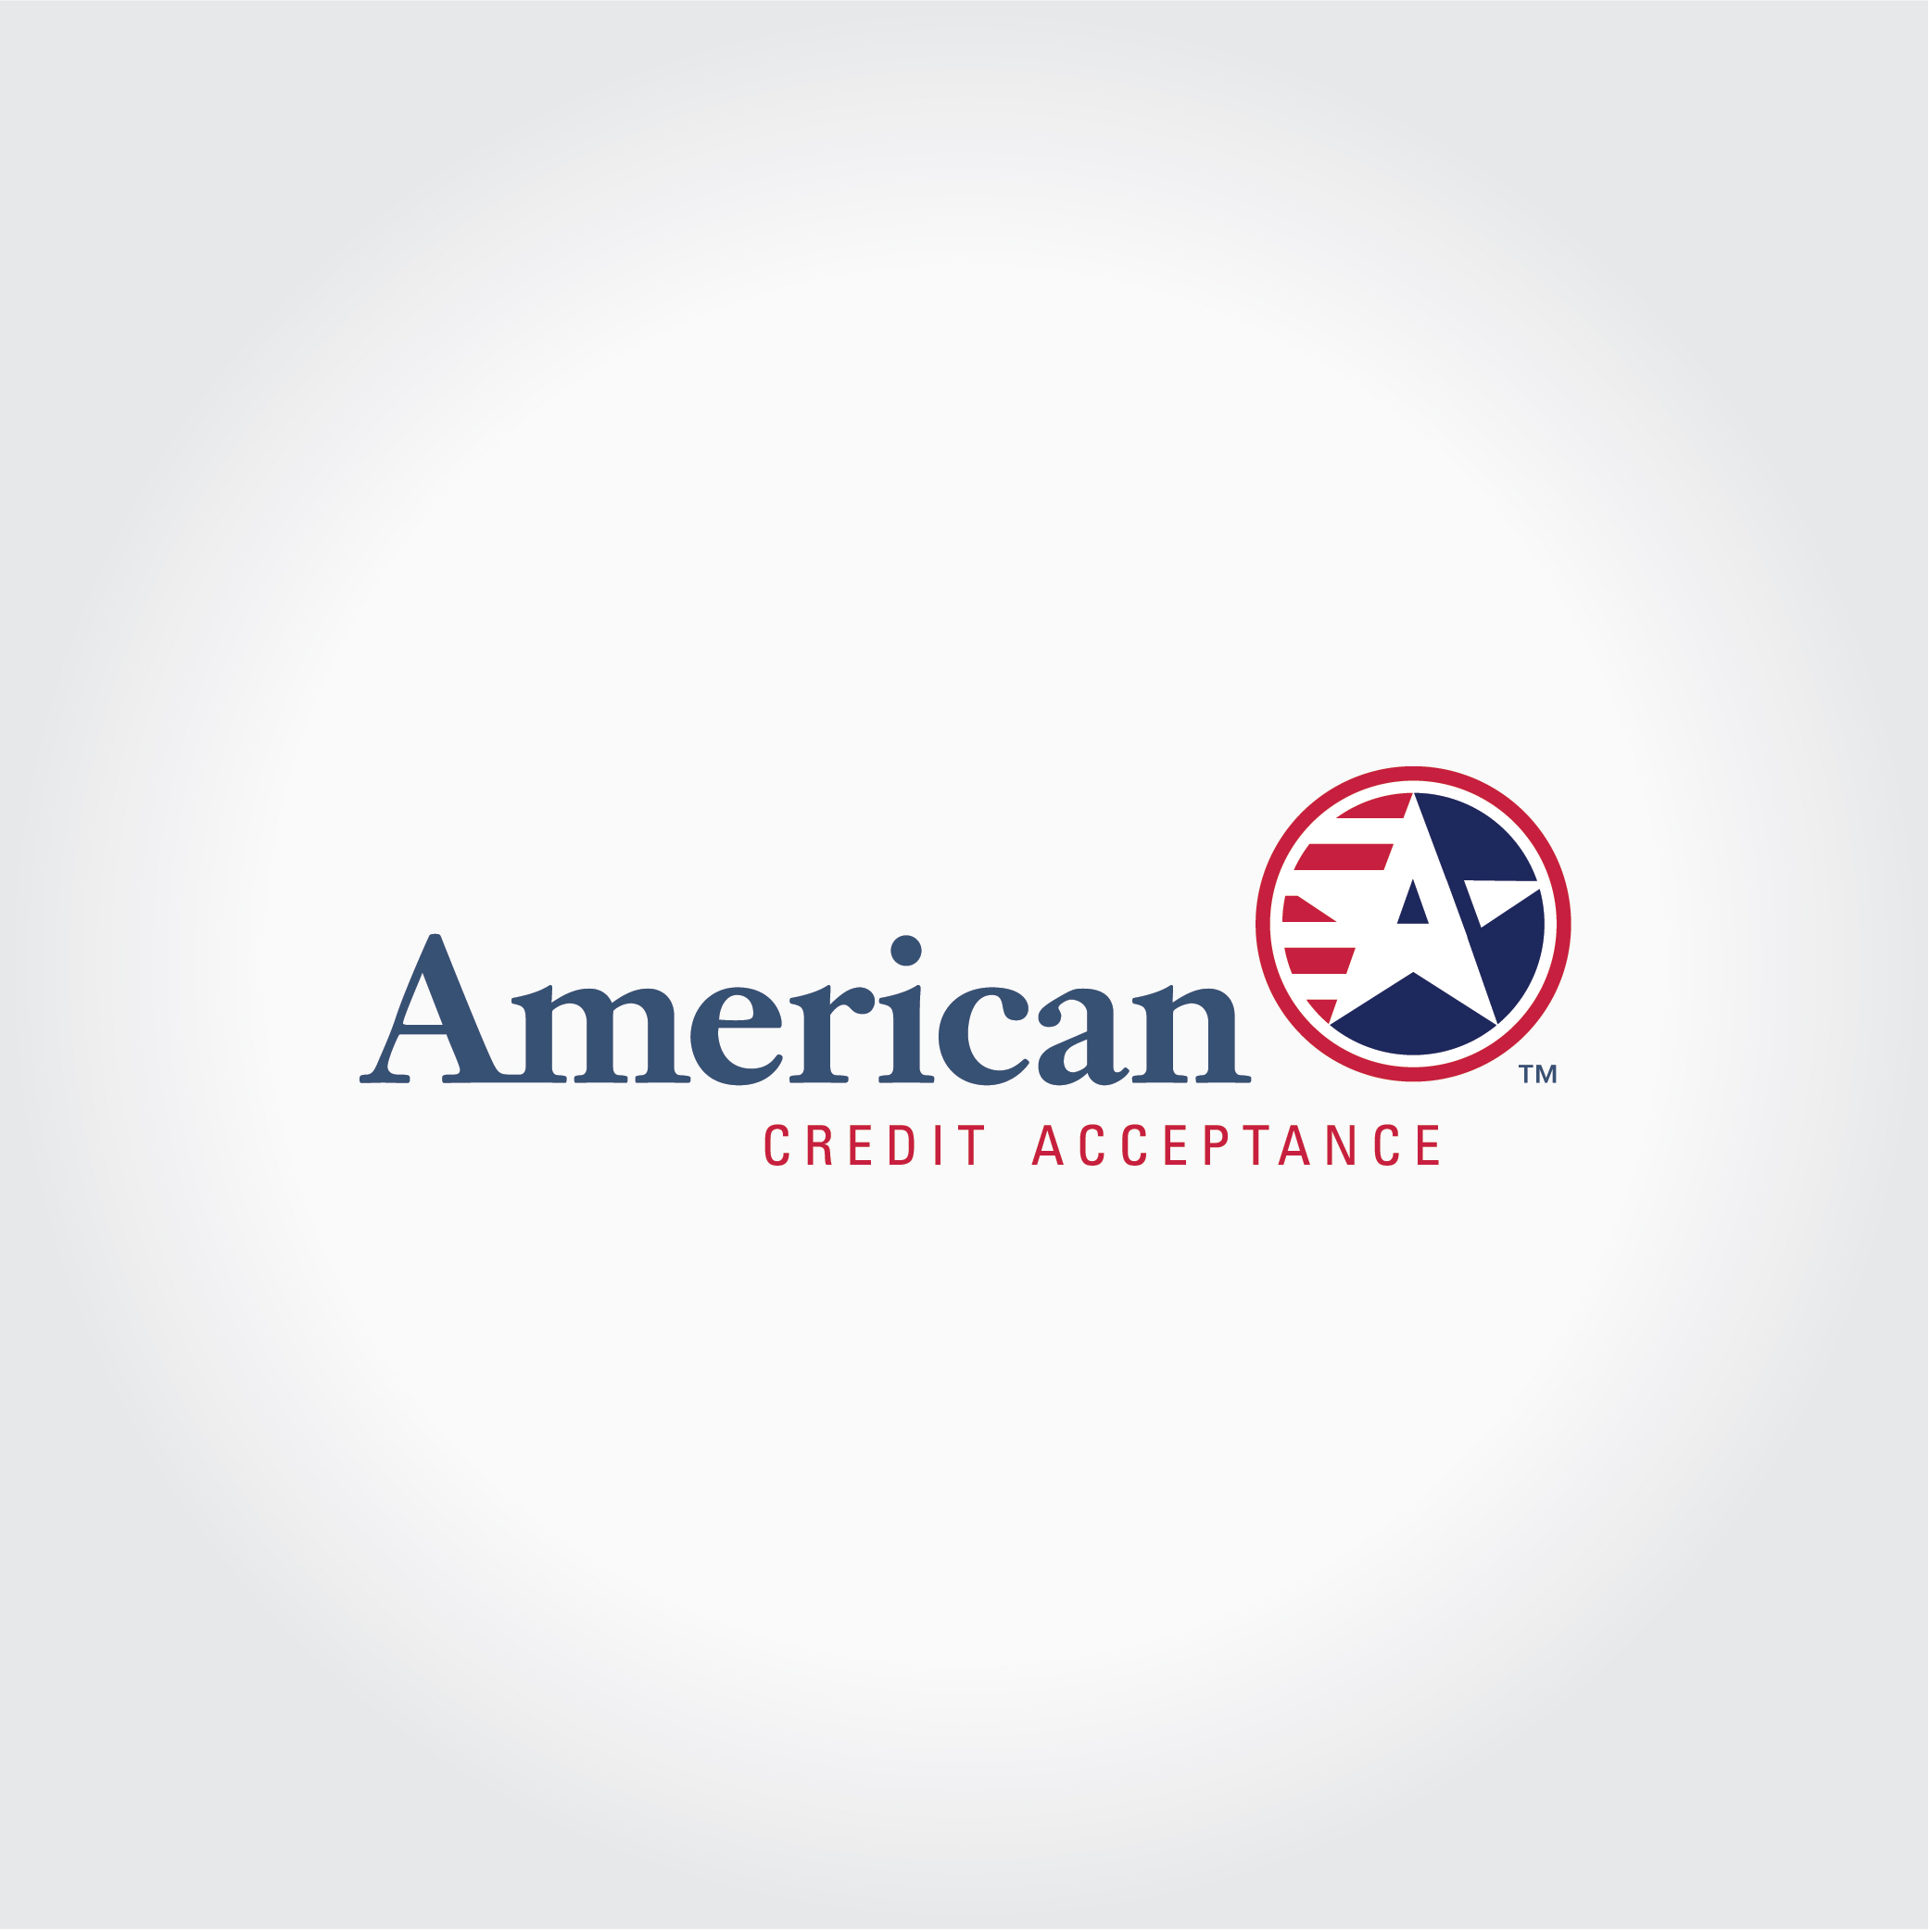 American Credit Acceptance Kendall Creative